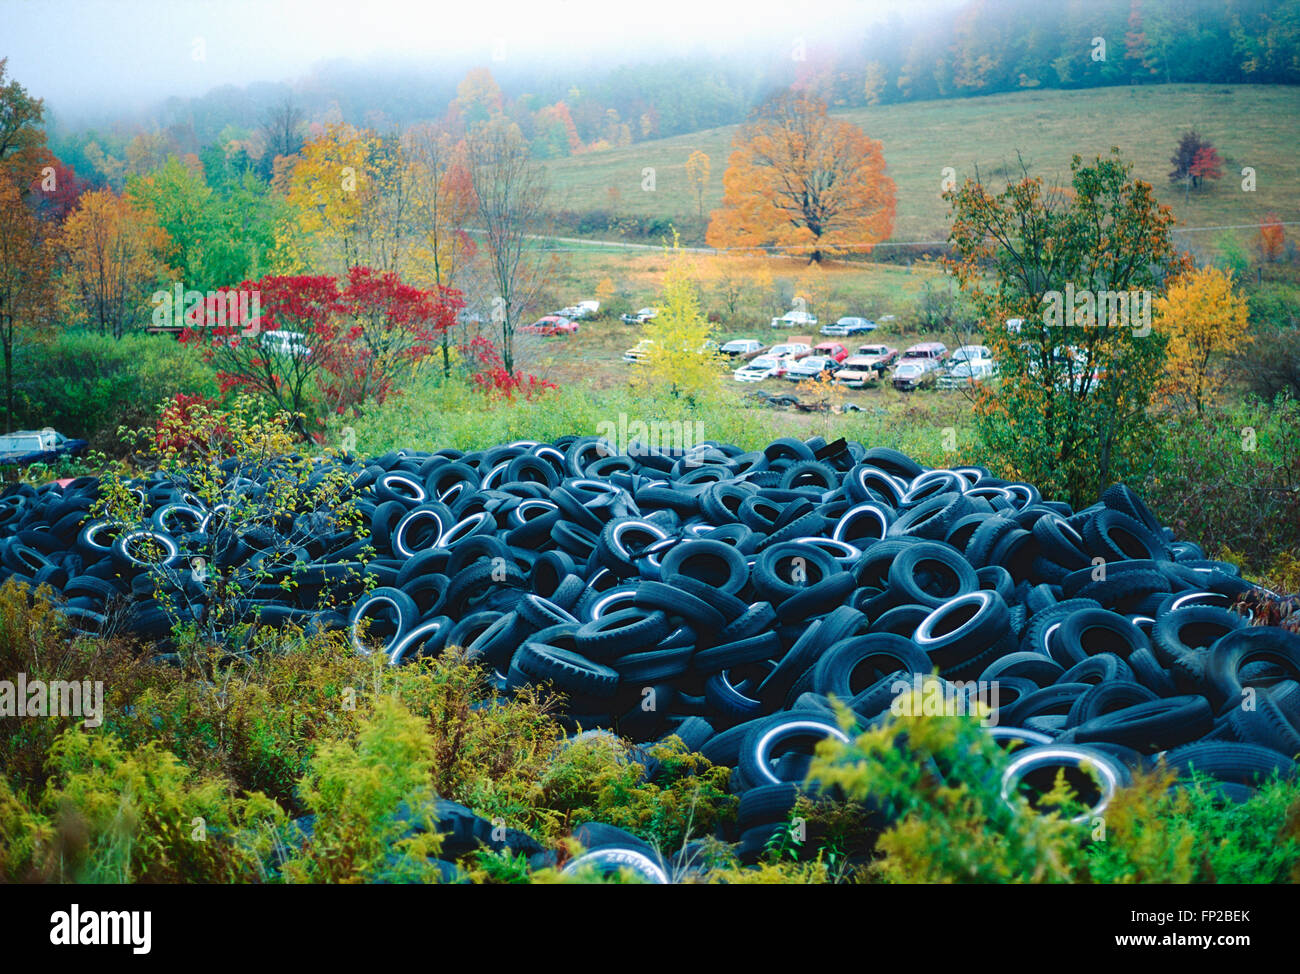 Old used automobile tires in landfill Stock Photo